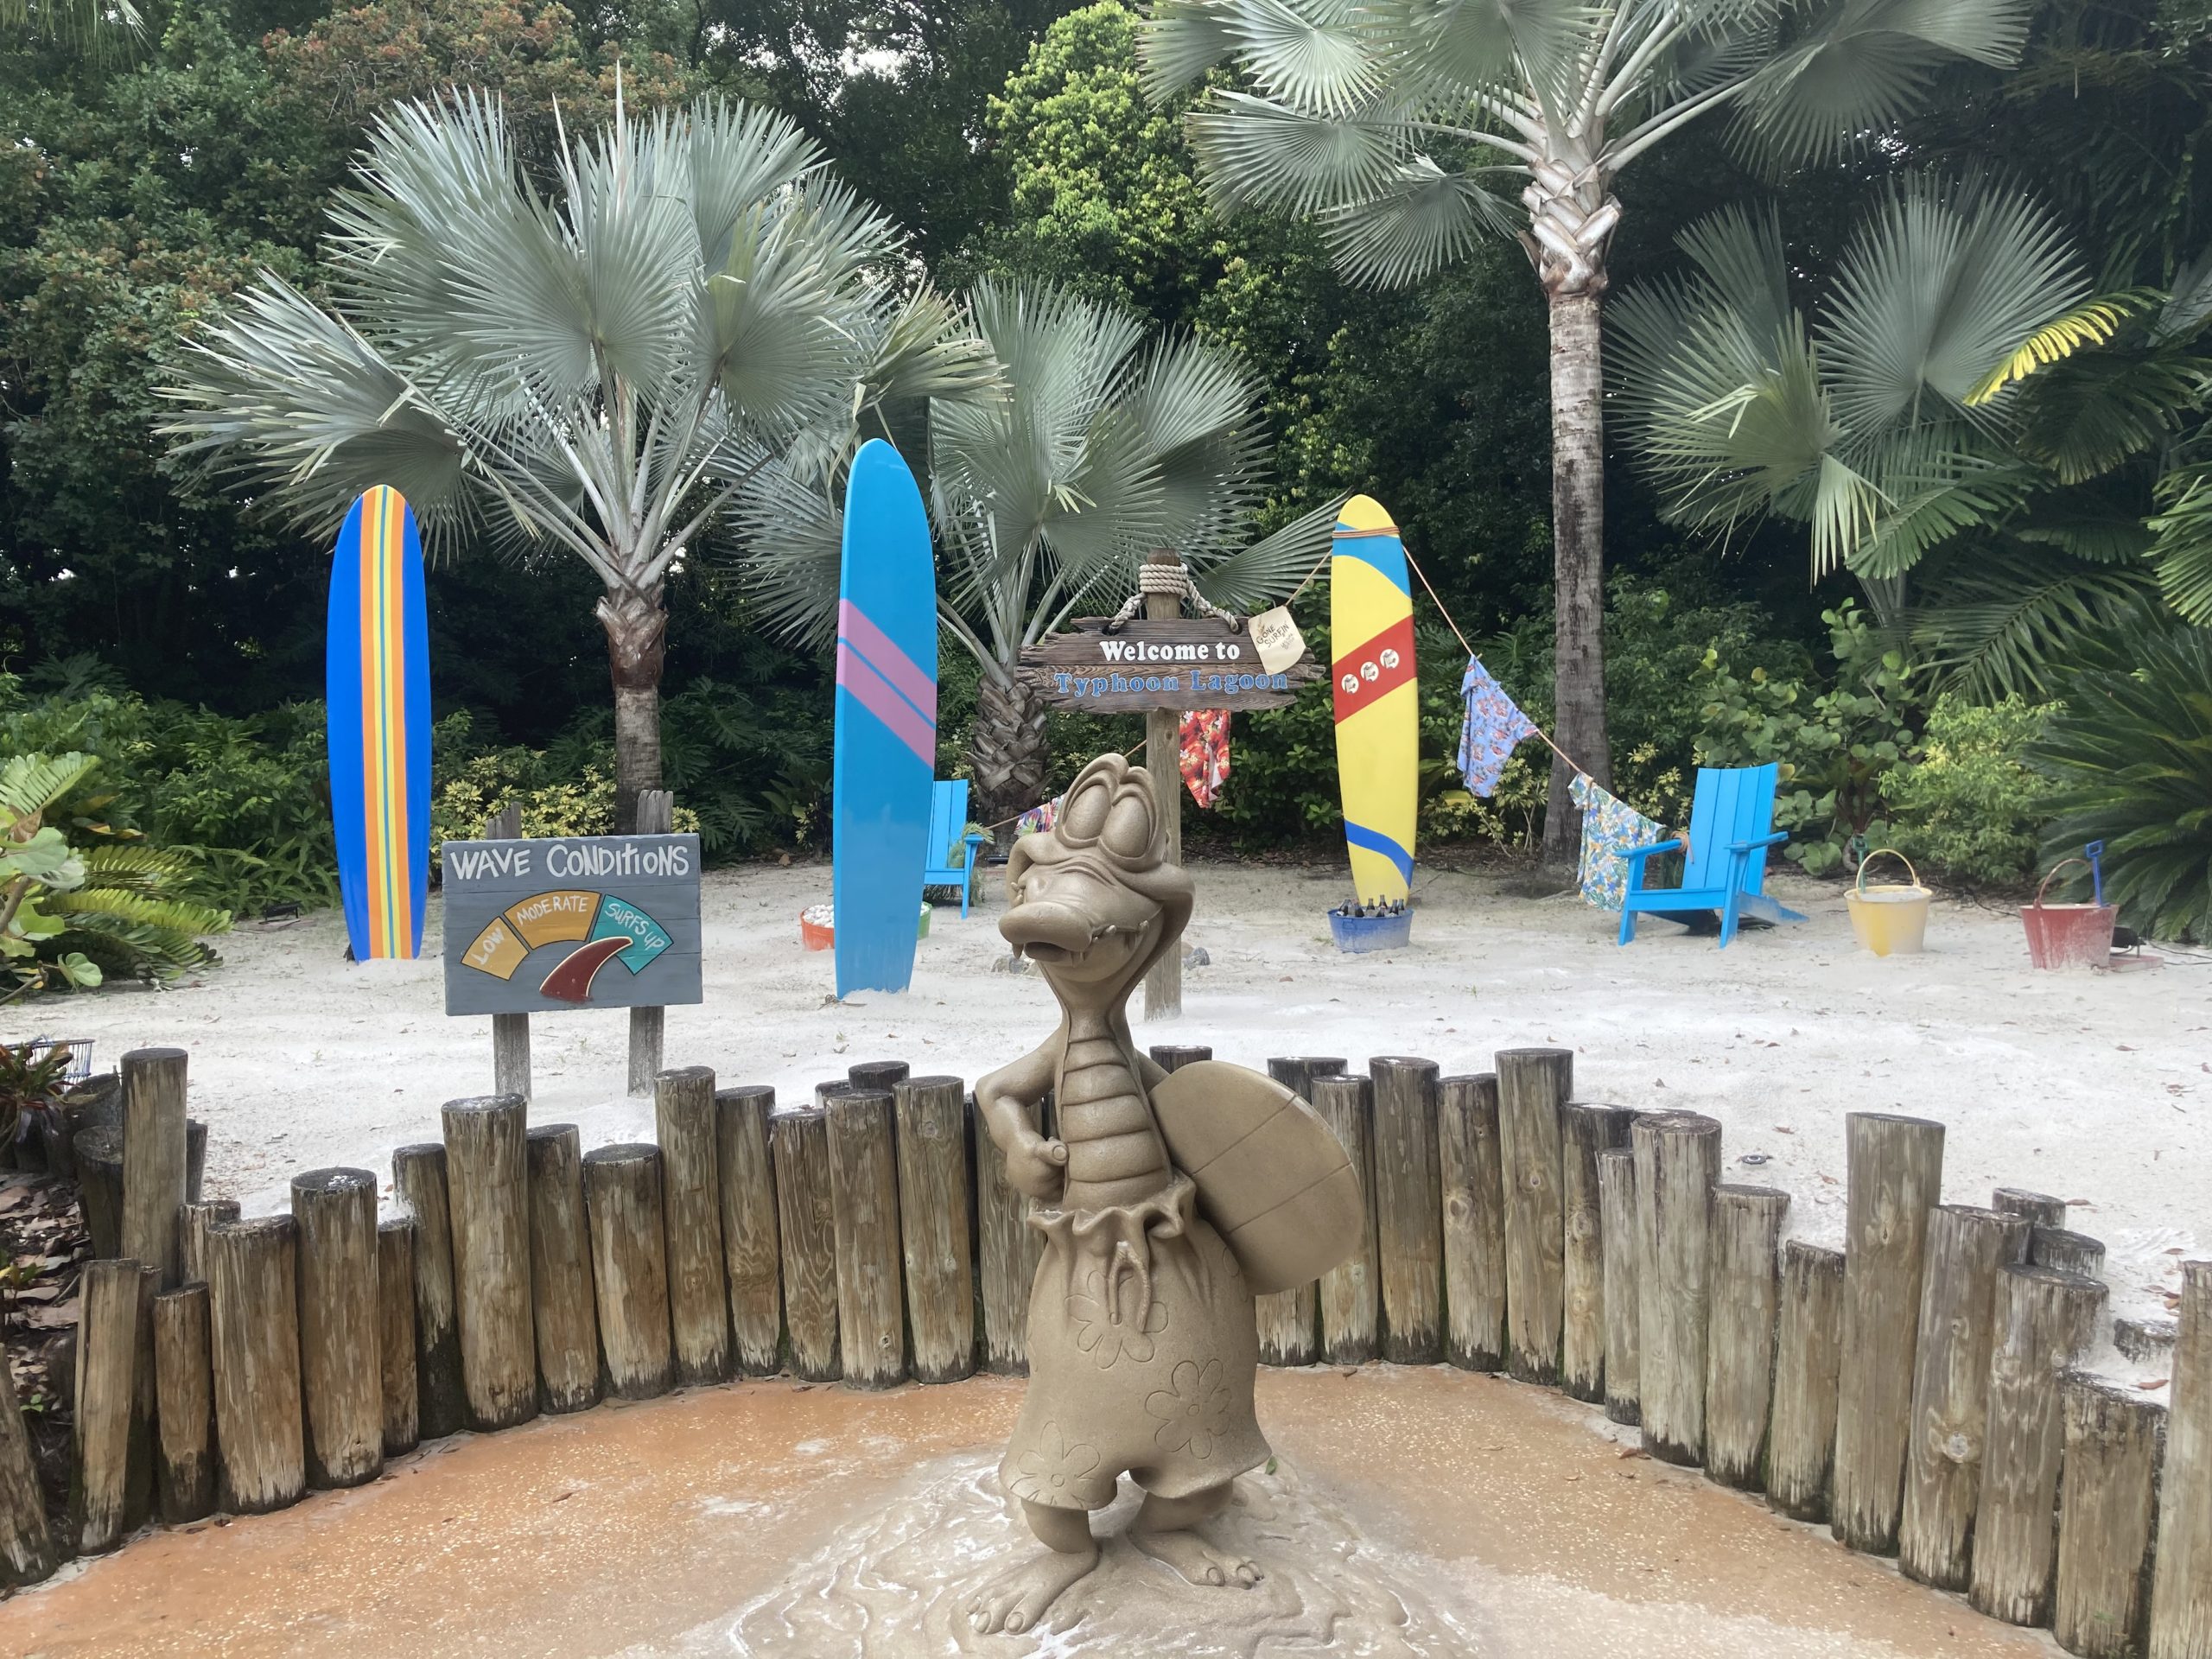 The Top 6 Things You Need to Do at Disney’s Typhoon Lagoon for a Swim-tastic Day